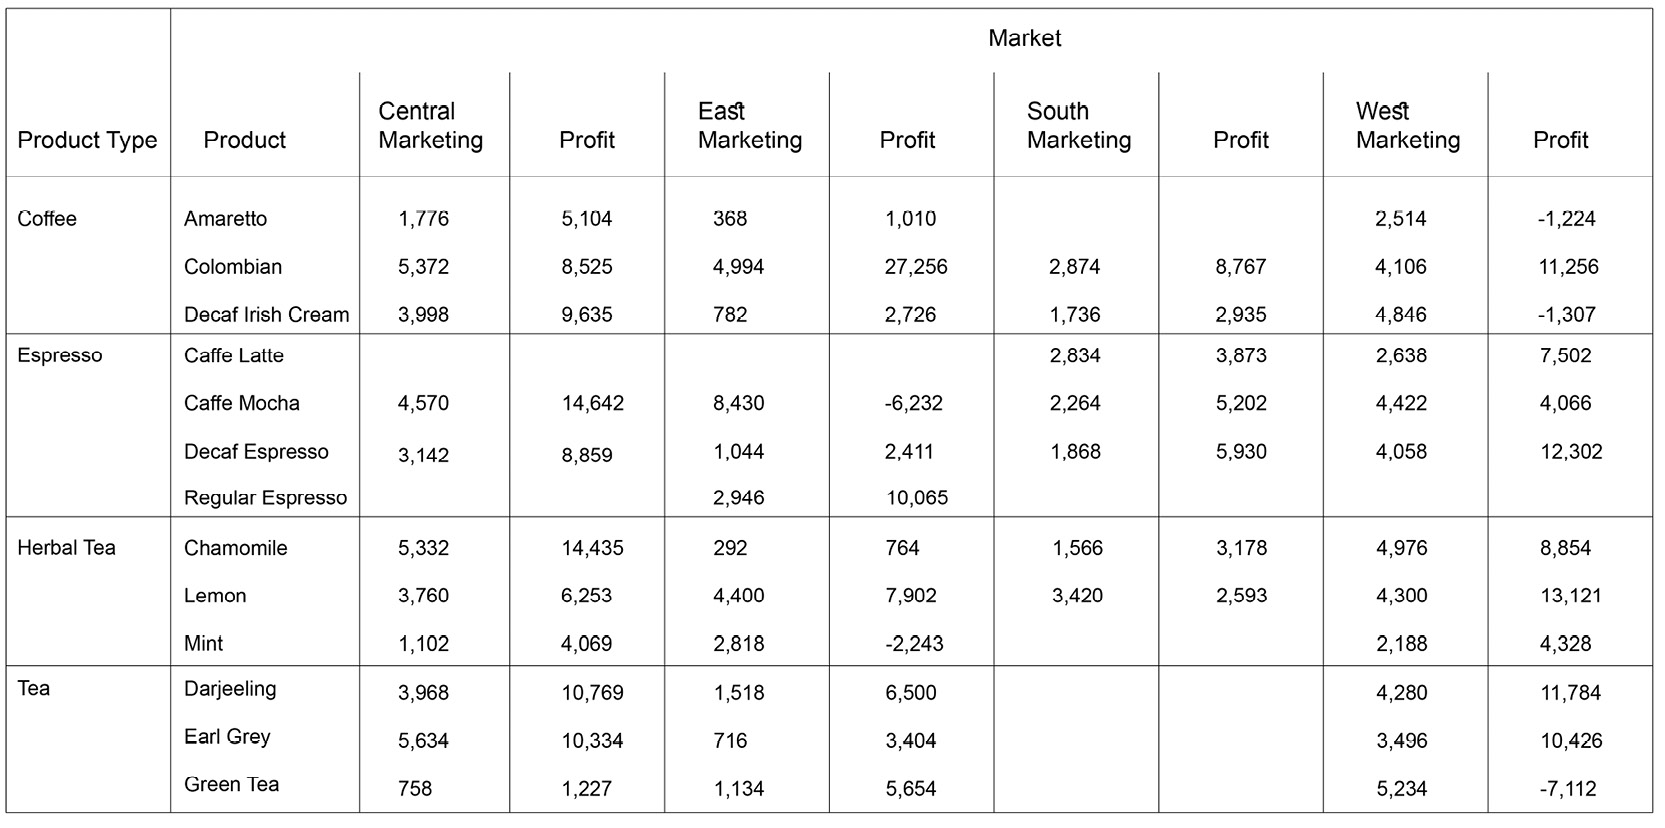 Figure 1.4: A screenshot of a grid view showing the marketing expense 
and profitability for products across markets
